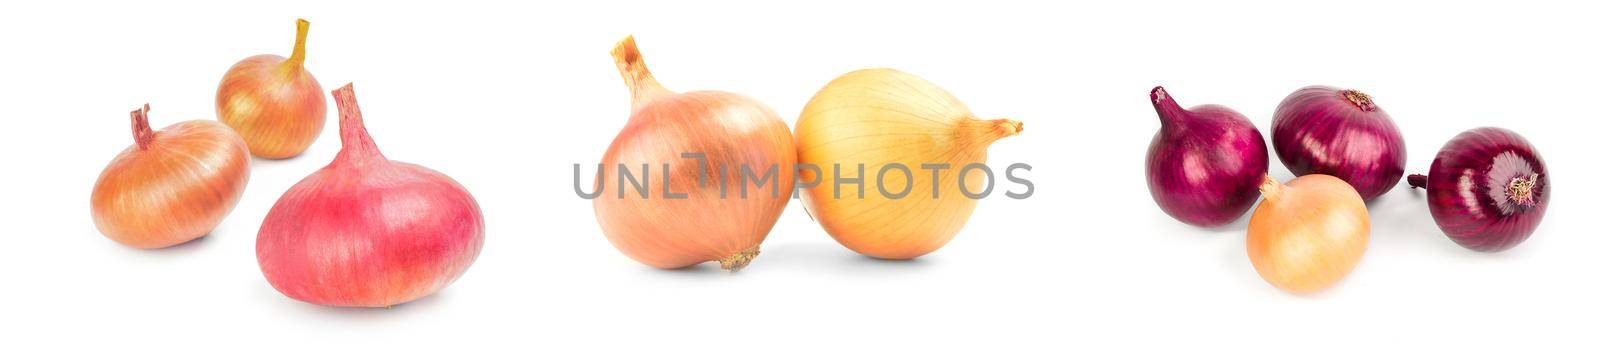 Collage of Onion isolated on a white background cutout by Proff